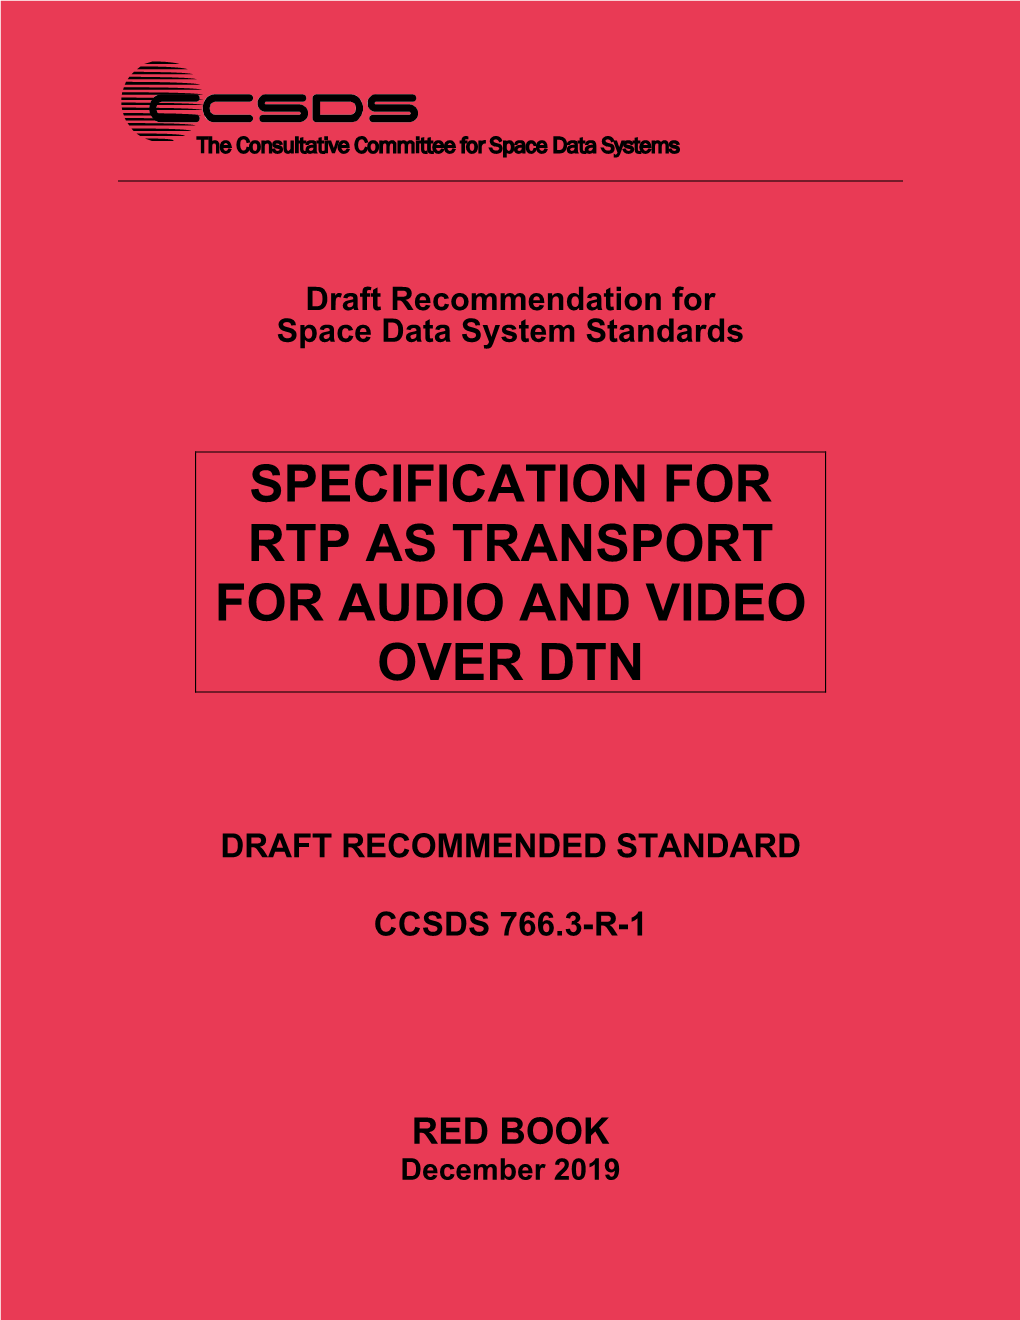 CCSDS 766.3-R-1, Specification for RTP As Transport for Audio And